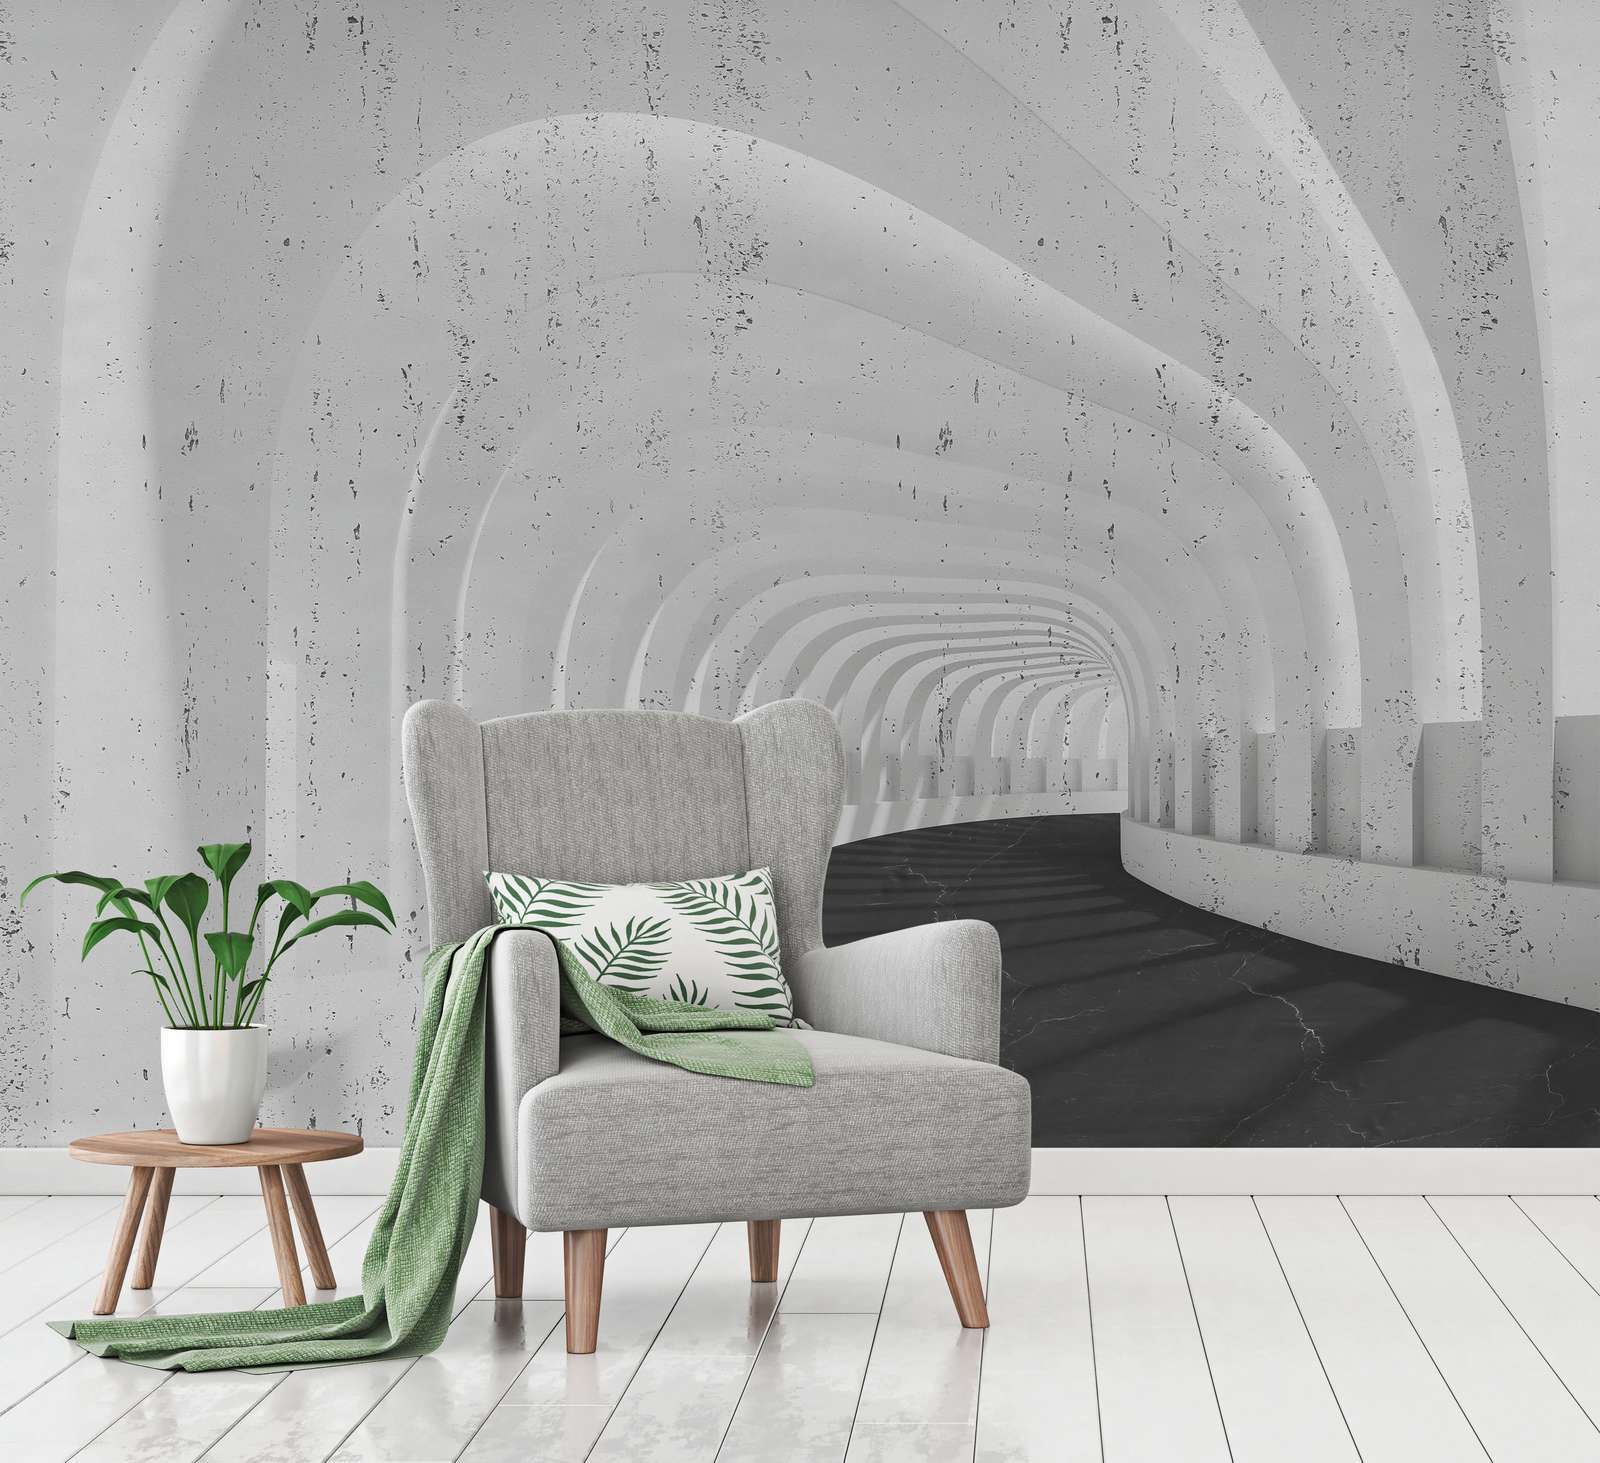 Photo wallpaper 3D tunnel of concrete with arches - grey, black